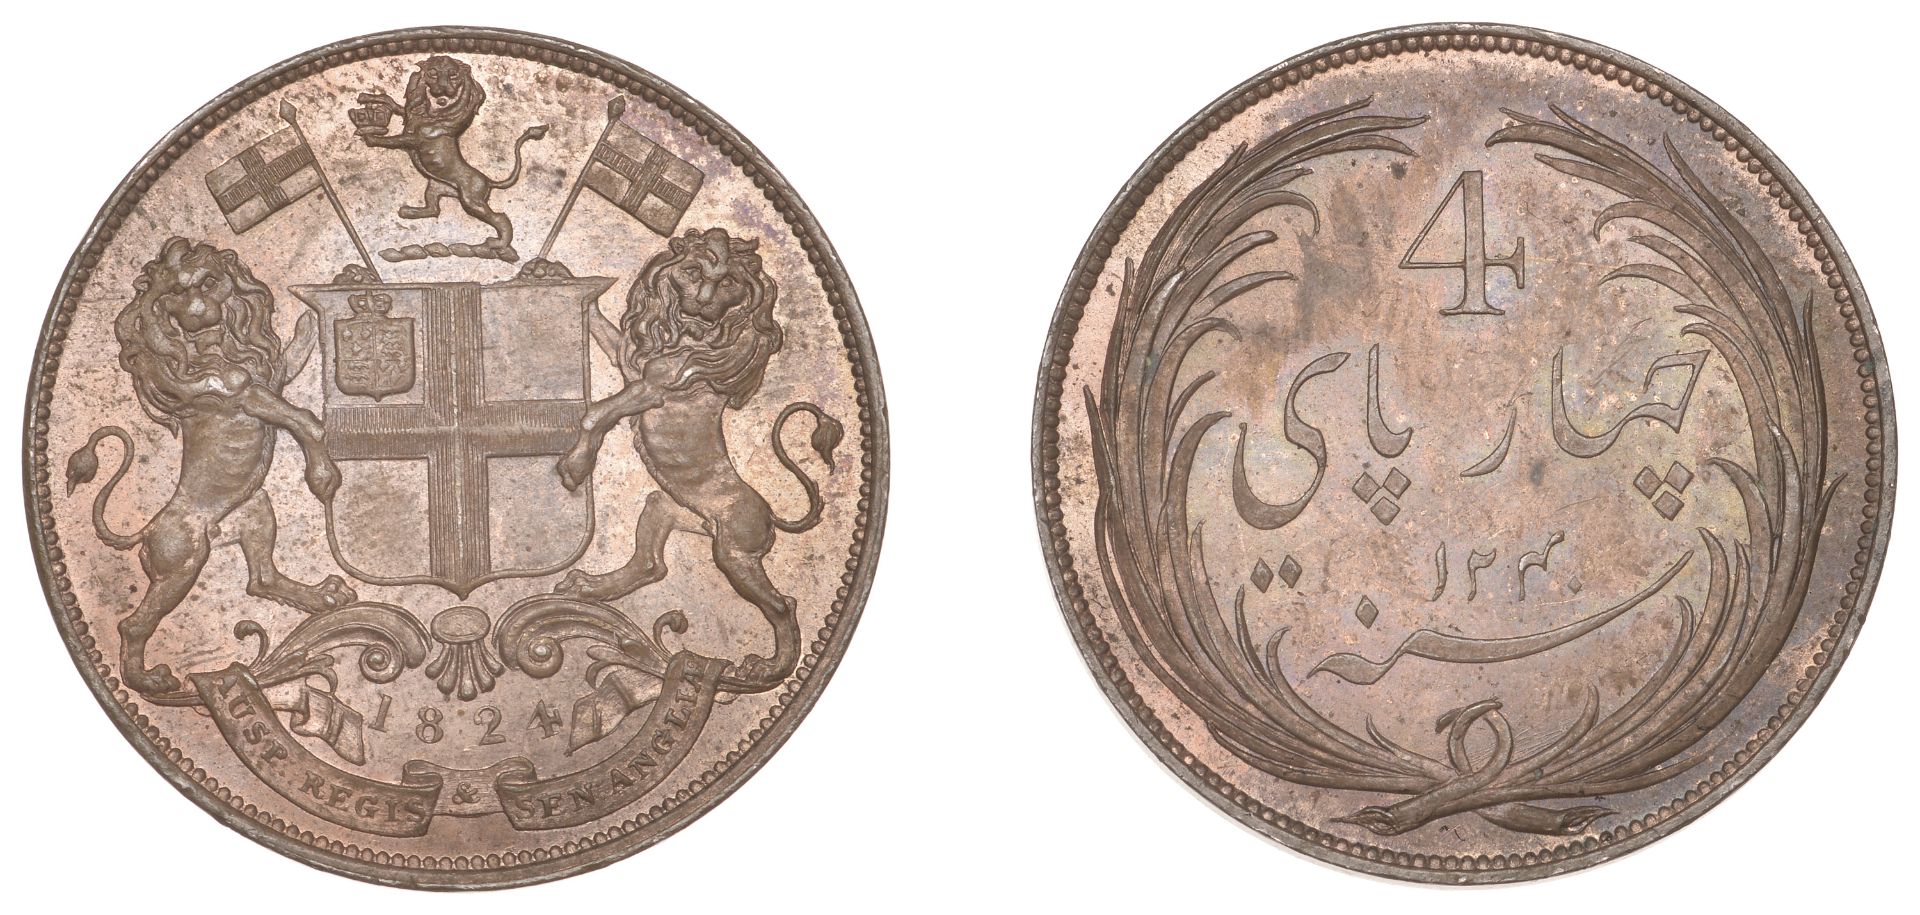 East India Company, Madras Presidency, Later coinages 1812-35, Royal Mint, London, copper 4...